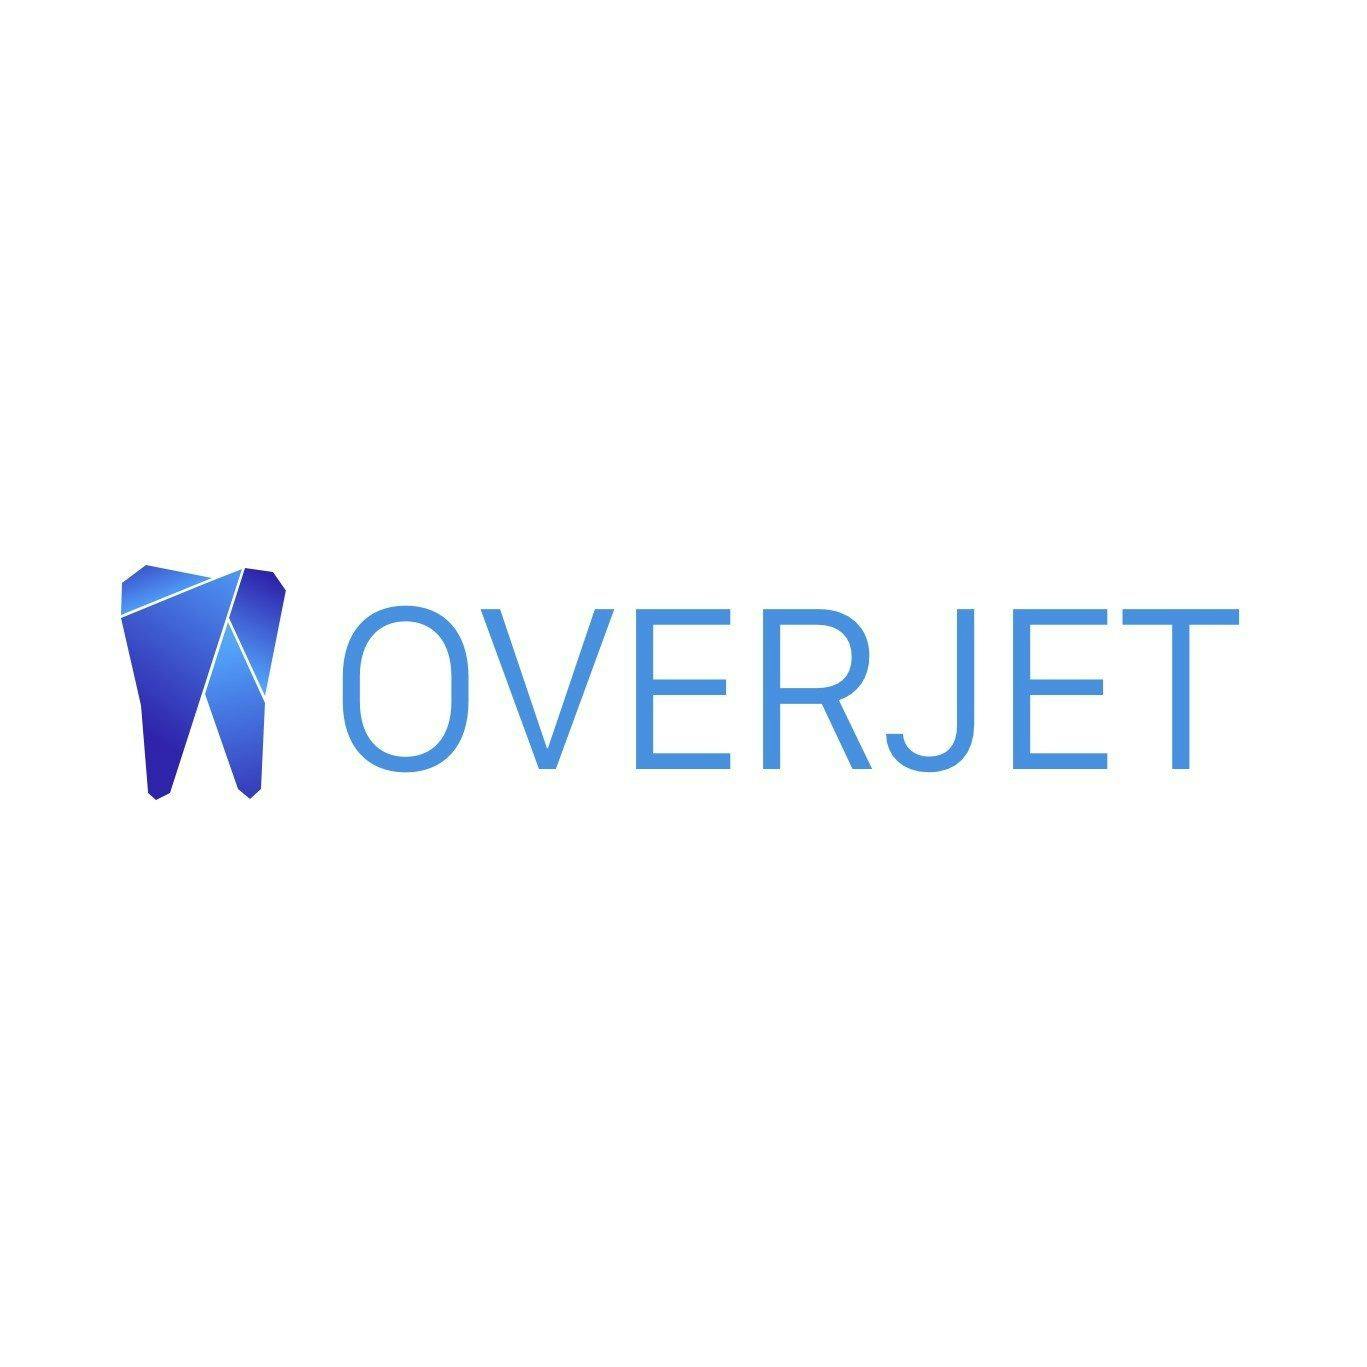 Overjet Acquires American Dental Examiners to Offer Clinical Review 